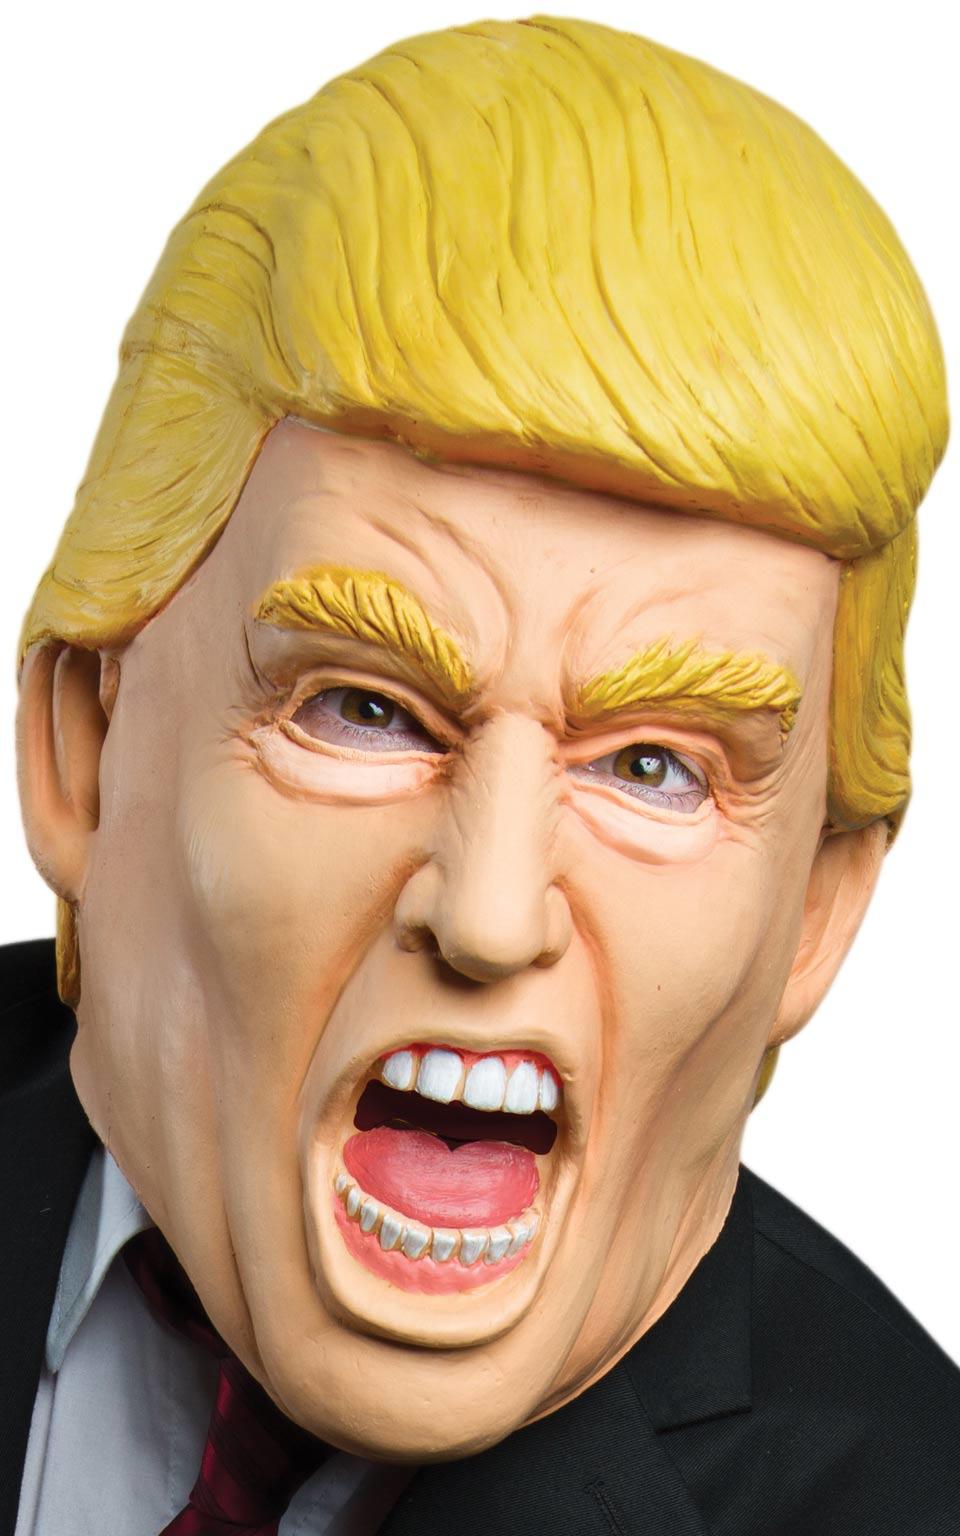 Donald Chump Mask Political Character by Rubies 33972 avalable here at Karnival Costumes online party shop